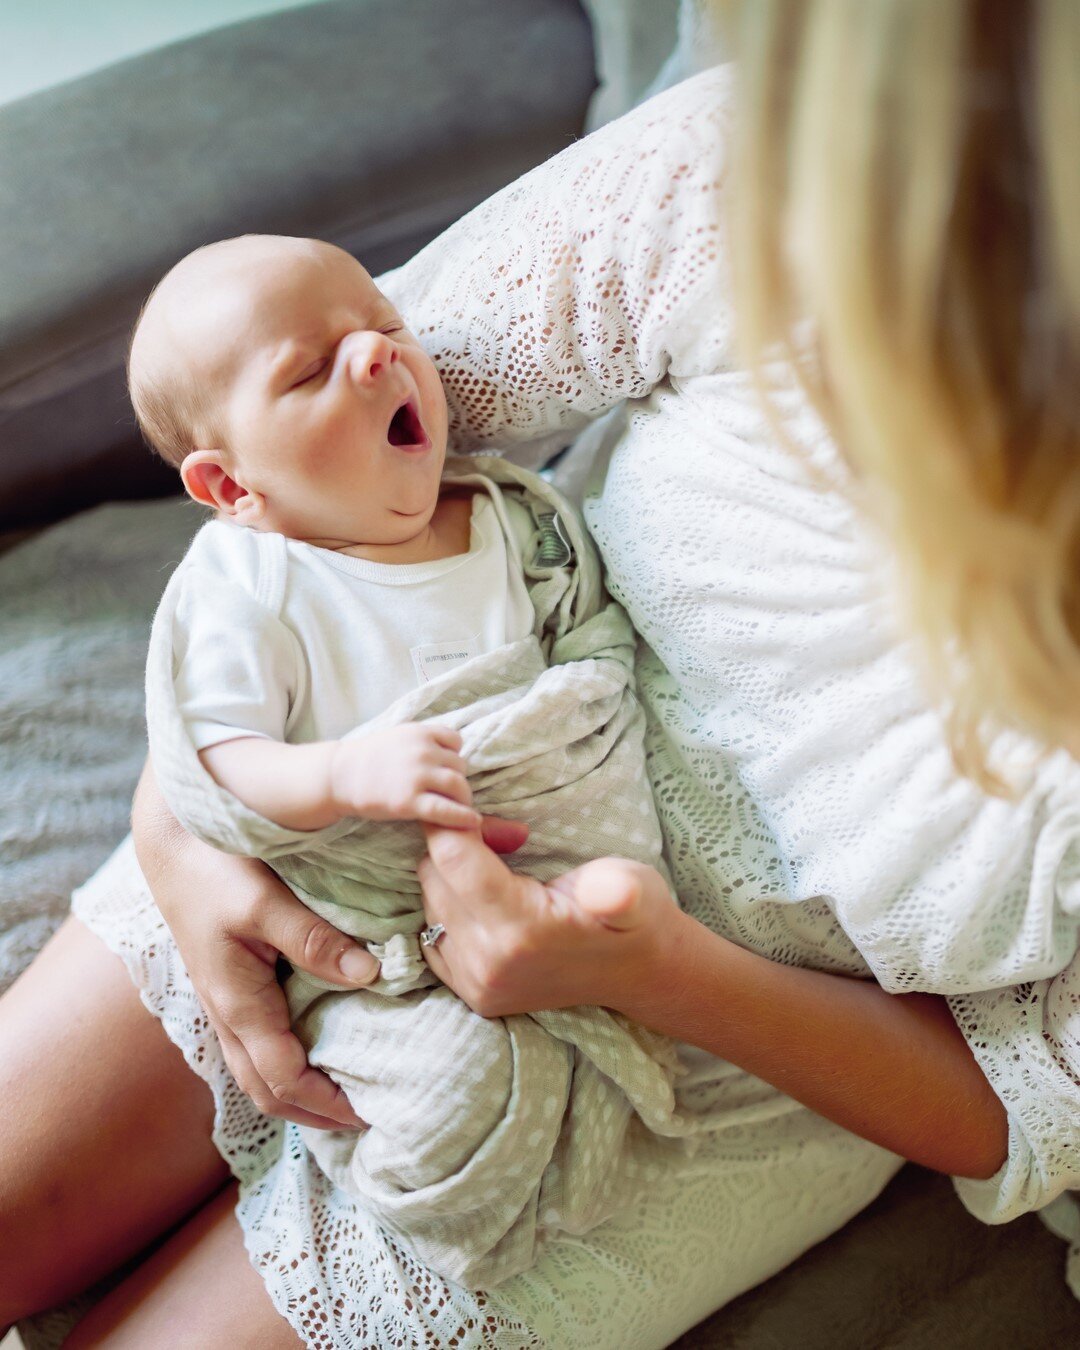 Are you even human if a baby yawn doesn&rsquo;t hit you in the warm and fuzzies??? ⠀⠀⠀⠀⠀⠀⠀⠀⠀
⠀⠀⠀⠀⠀⠀⠀⠀⠀
⠀⠀⠀⠀⠀⠀⠀⠀⠀
⠀⠀⠀⠀⠀⠀⠀⠀⠀
⠀⠀⠀⠀⠀⠀⠀⠀⠀
⠀⠀⠀⠀⠀⠀⠀⠀⠀
⠀⠀⠀⠀⠀⠀⠀⠀⠀
⠀⠀⠀⠀⠀⠀⠀⠀⠀
⠀⠀⠀⠀⠀⠀⠀⠀⠀
⠀⠀⠀⠀⠀⠀⠀⠀⠀
⠀⠀⠀⠀⠀⠀⠀⠀⠀
.⠀⠀⠀⠀⠀⠀⠀⠀⠀
⠀⠀⠀⠀⠀⠀⠀⠀⠀
 .⠀⠀⠀⠀⠀⠀⠀⠀⠀
.⠀⠀⠀⠀⠀⠀⠀⠀⠀
.⠀⠀⠀⠀⠀⠀⠀⠀⠀
